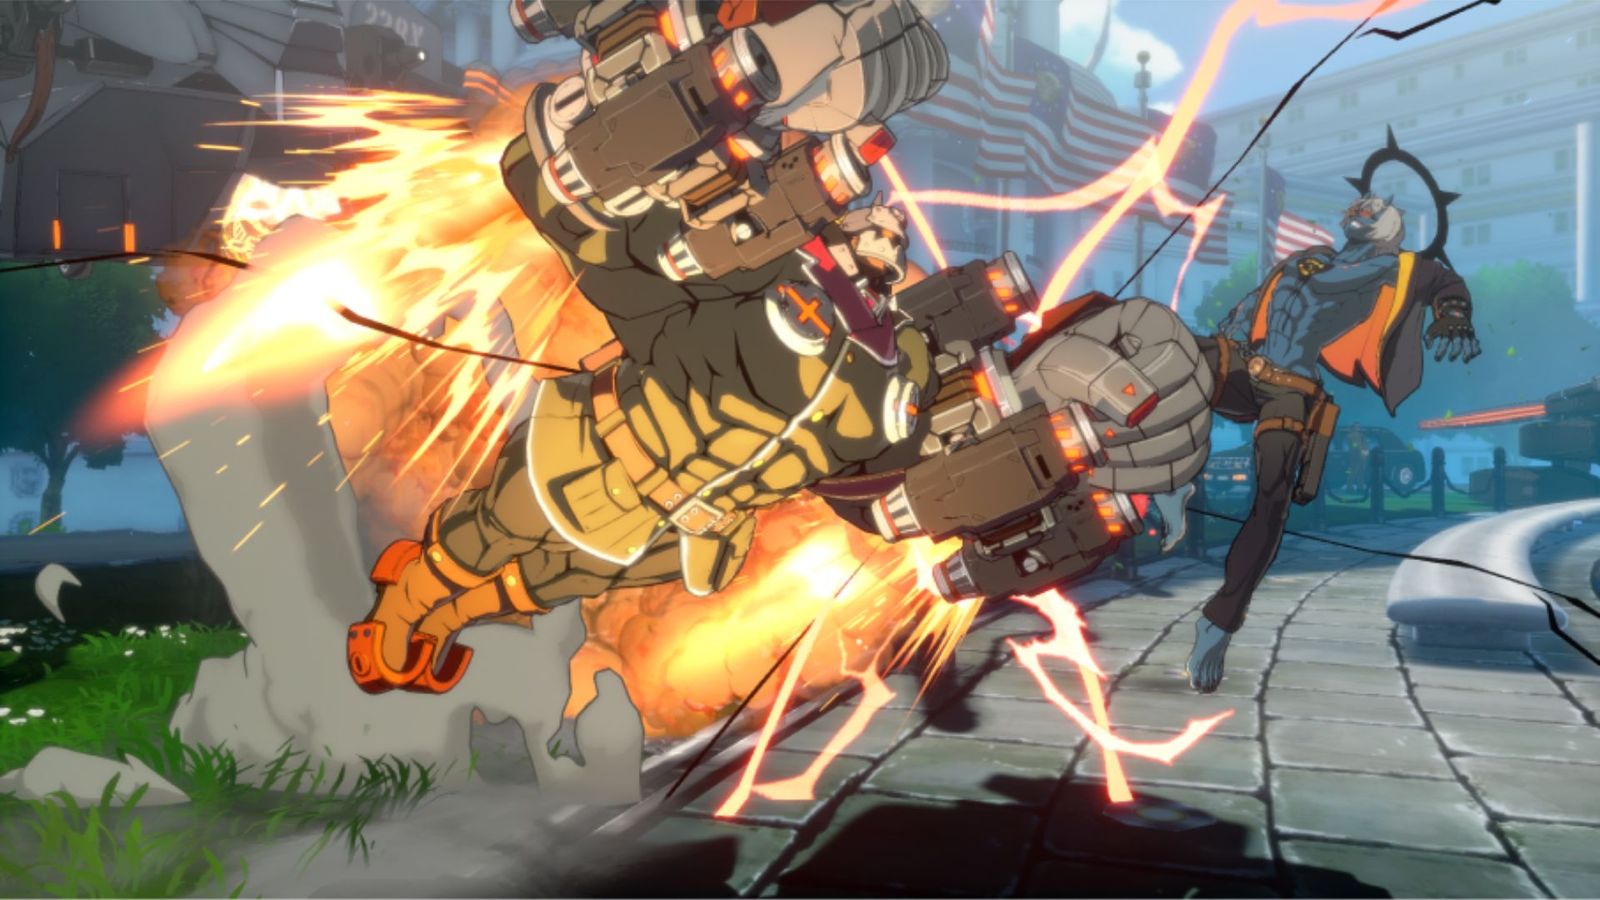 Potemkin using an aerial move in Guilty Gear Strive